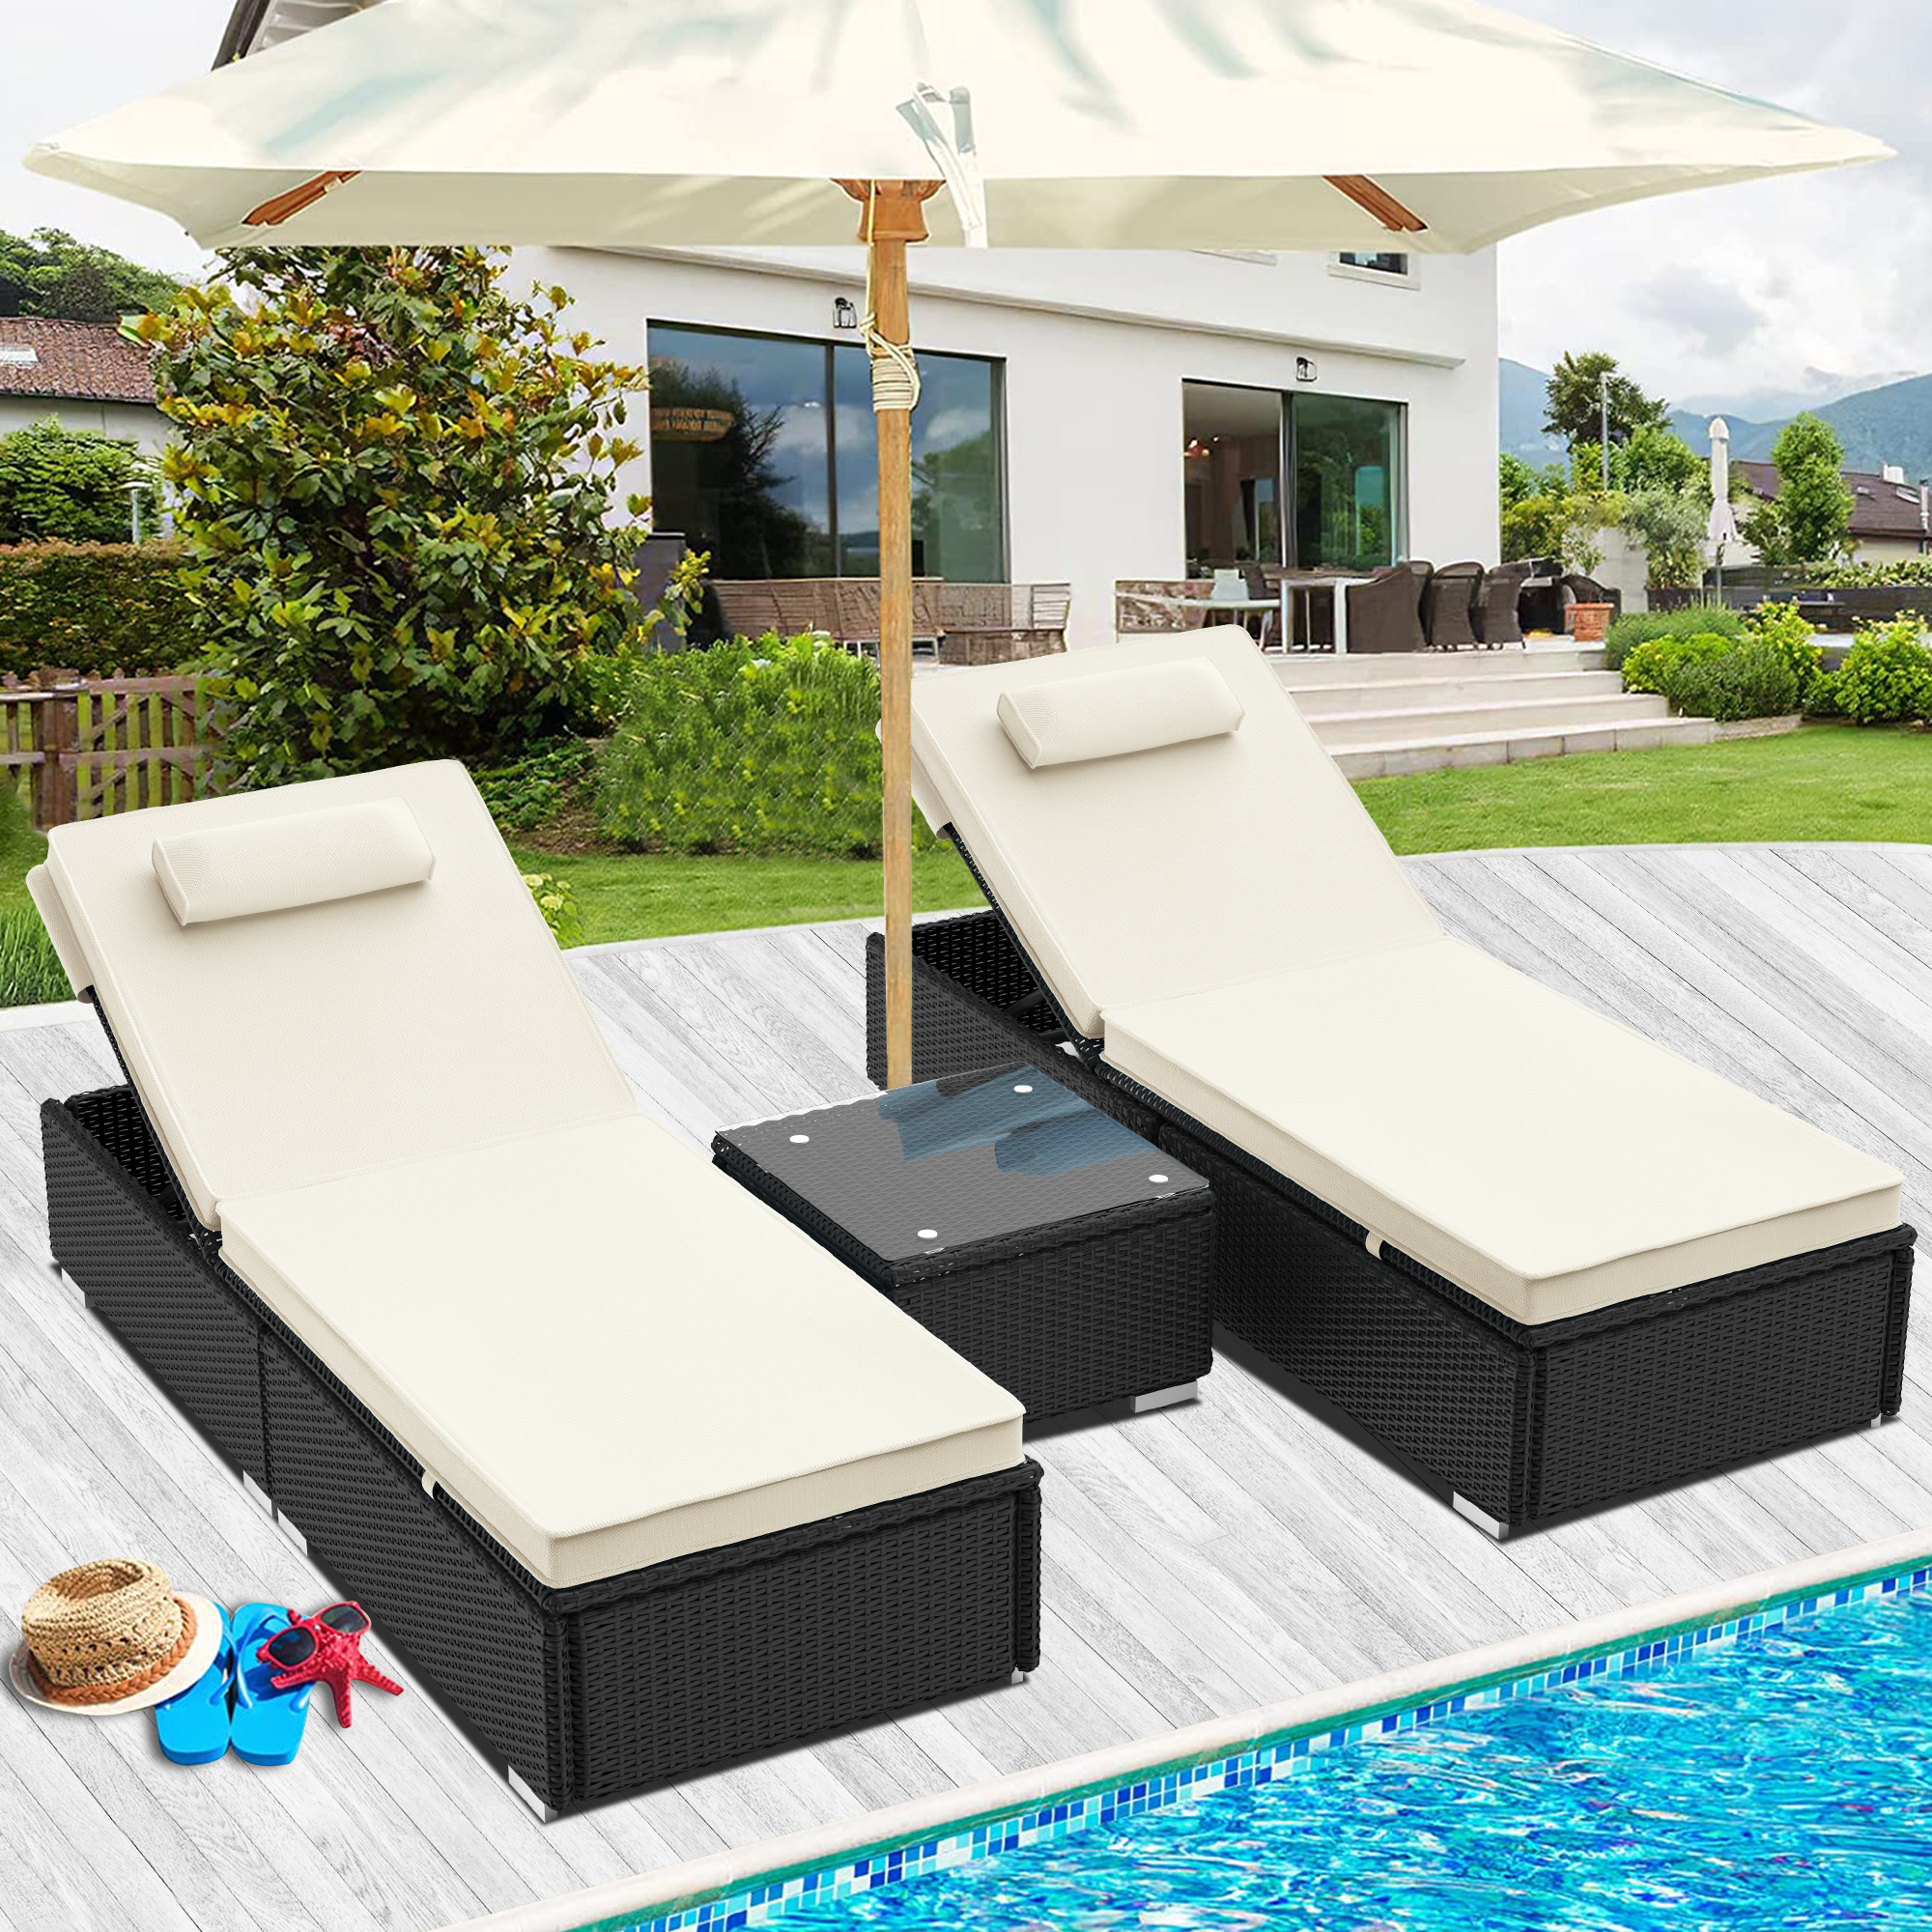 SESSLIFE Chaise Lounge Chair for Outside, Rattan Wicker Outdoor Lounge Chair, Adjustable Pool Lounge Chair with Side Table & Thickened Cushion for Patio Poolside Deck - image 1 of 7